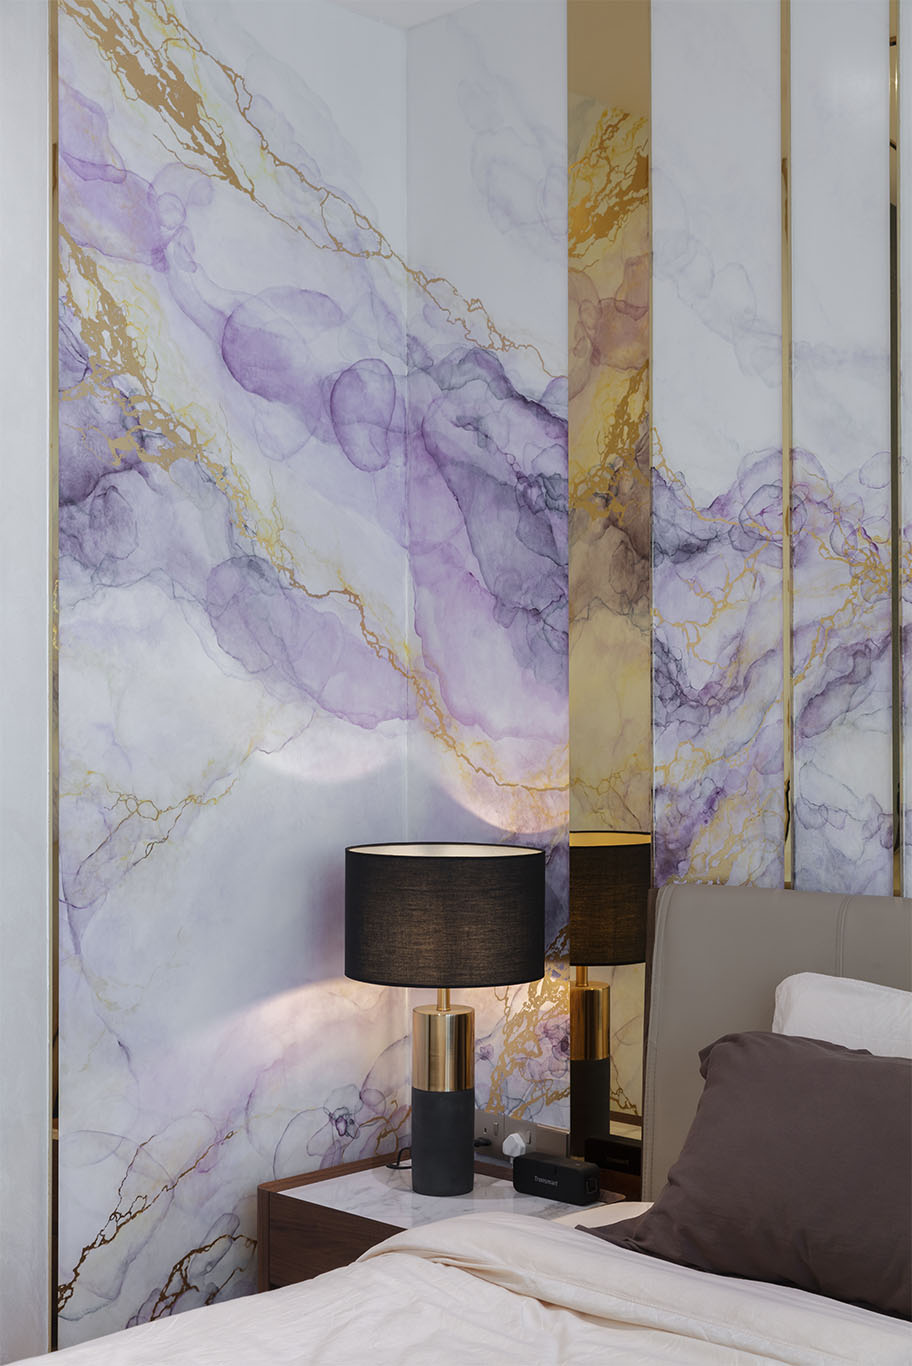 MIEUX La Famillie De Lee white purple and gold marble wall and dark brown table night lamp mieux interior design